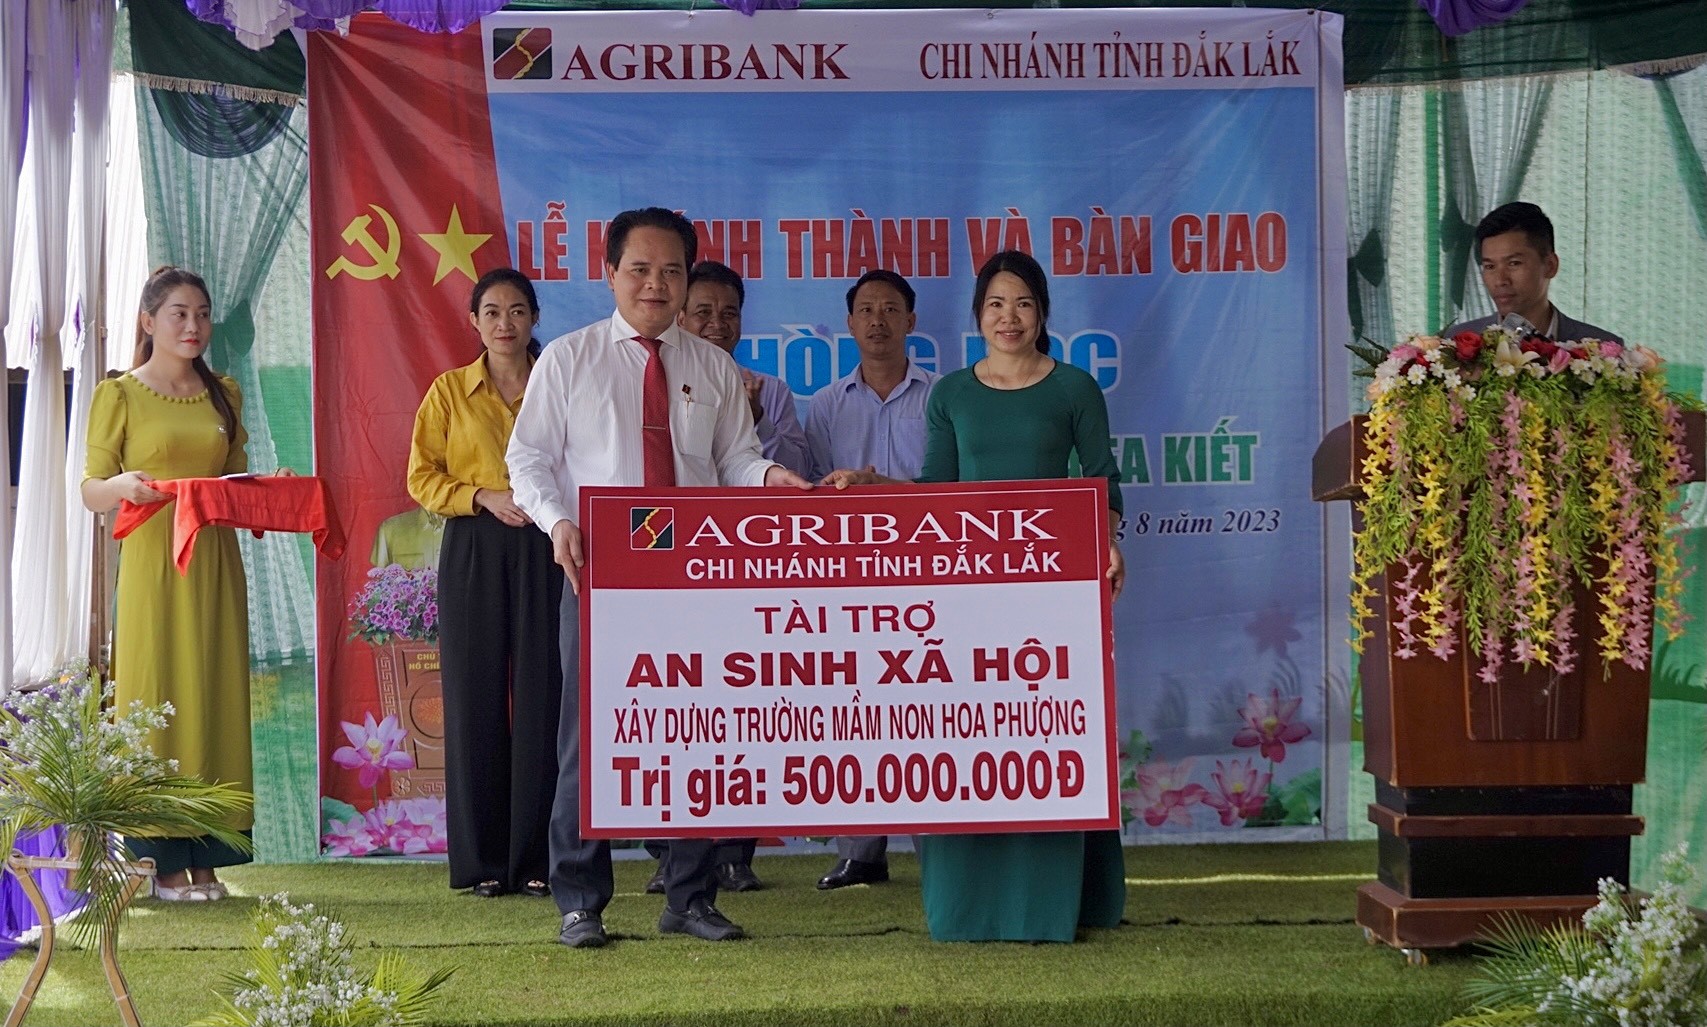 Agribank Dak Lak Province inaugurated and handed over a classroom in Ea Kiet commune